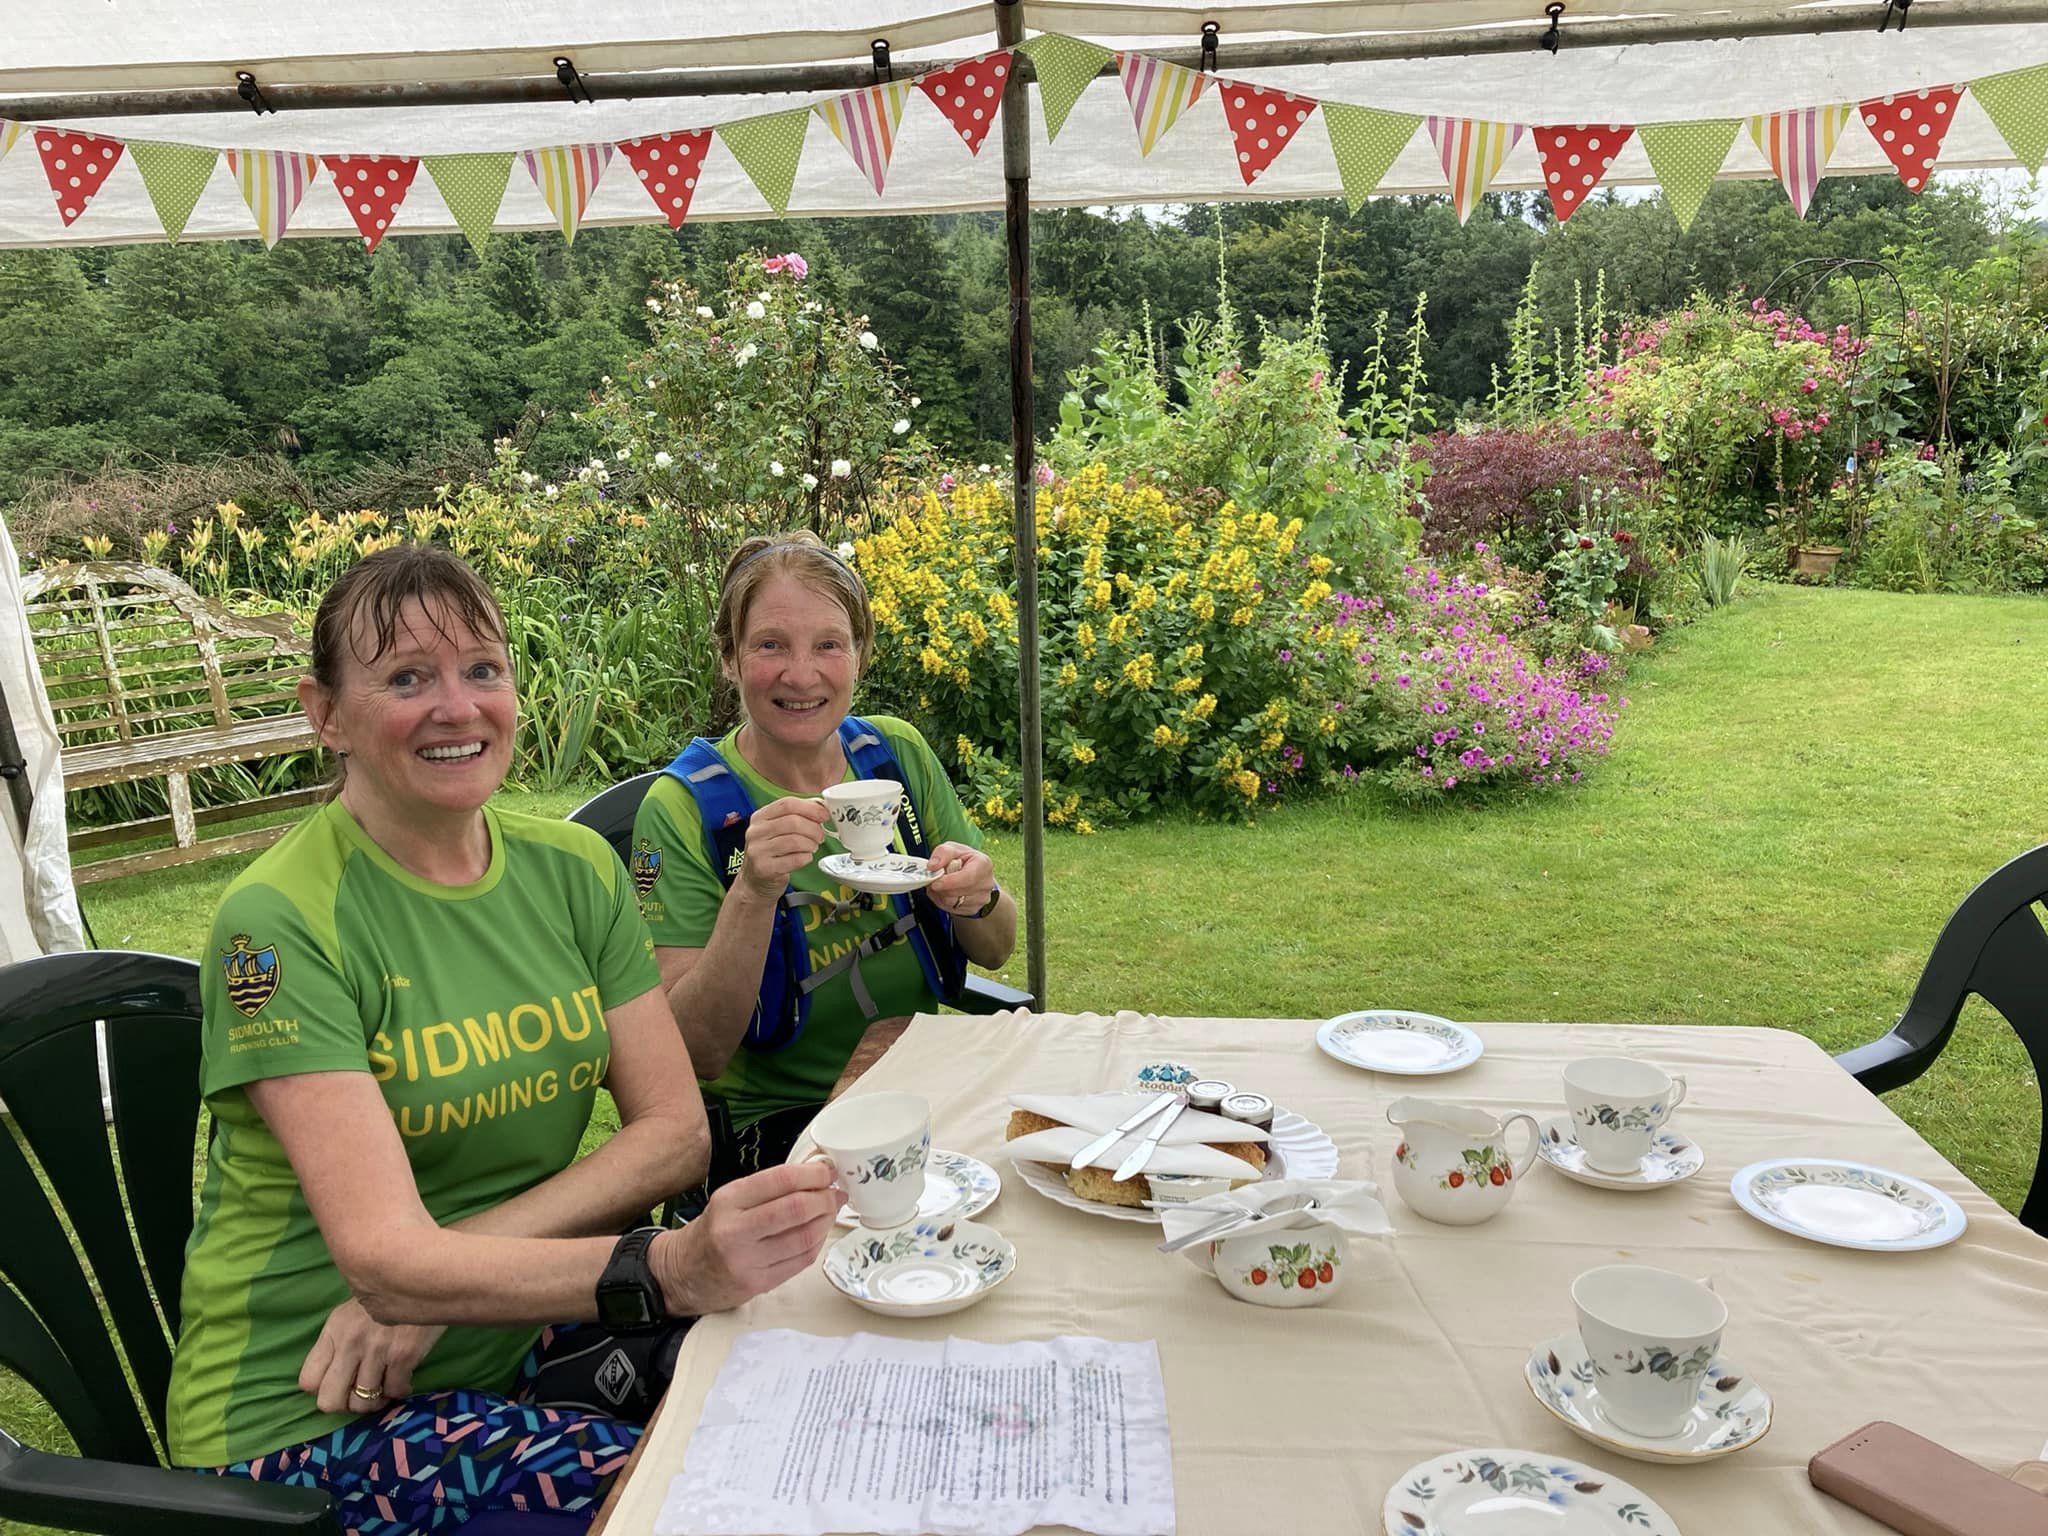 Summer’s Here-Cream Teas, Jelly Snakes And Beer For Sidmouth Running Club